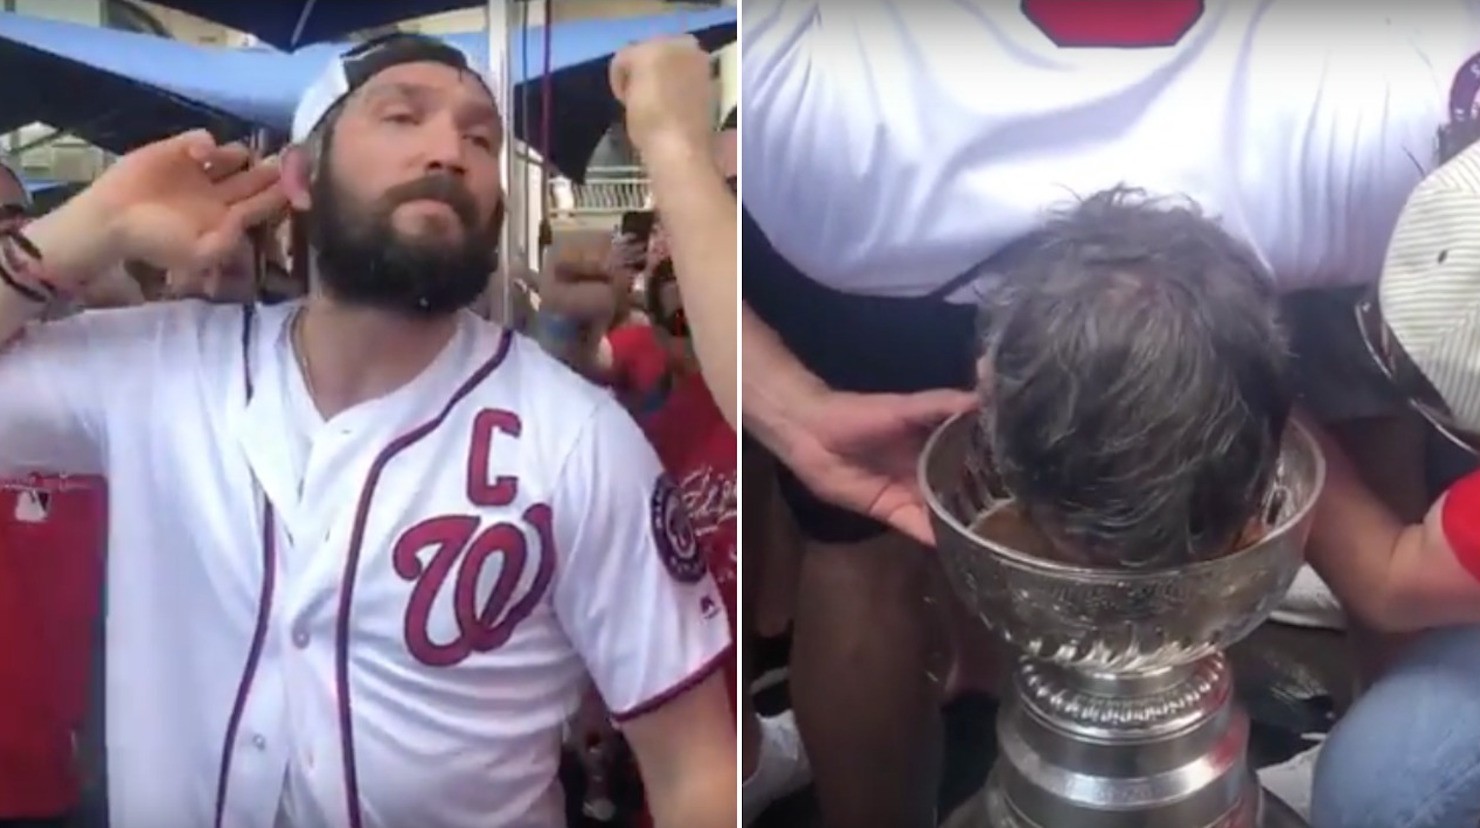 No more keg stands with the Stanley Cup, the Hall of Fame asks politely